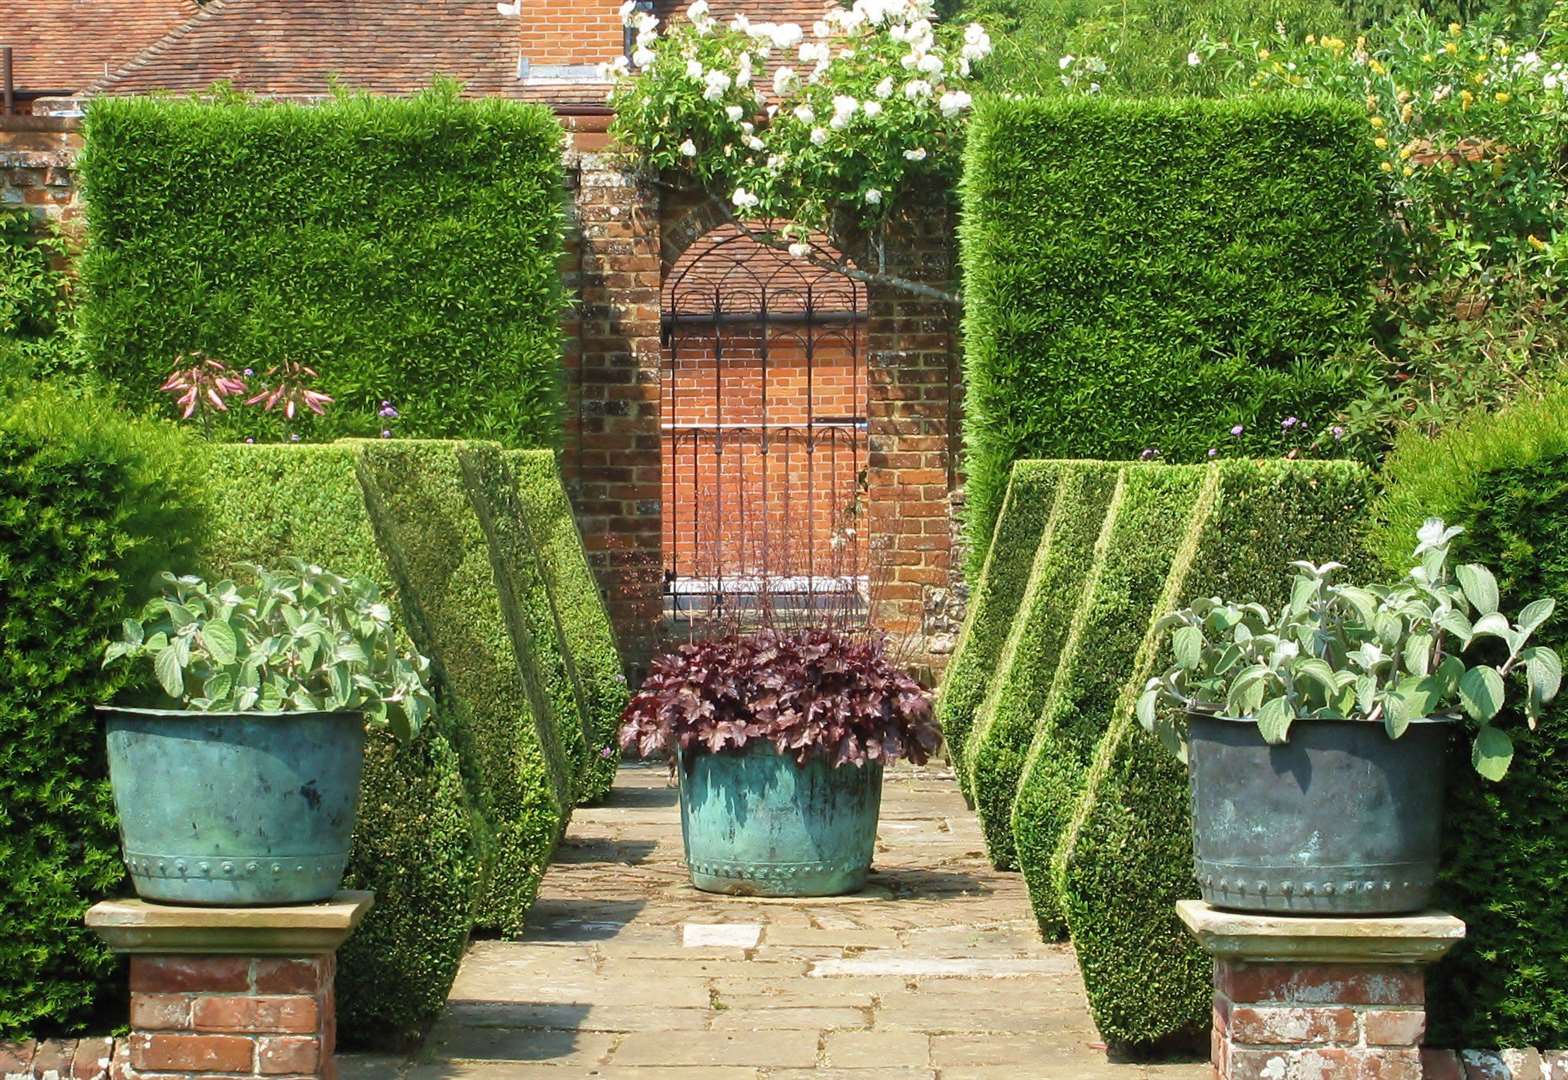 Doddington Place is opening as part of the National Garden Scheme this month. Picture: Doddington Place/National Garden Scheme